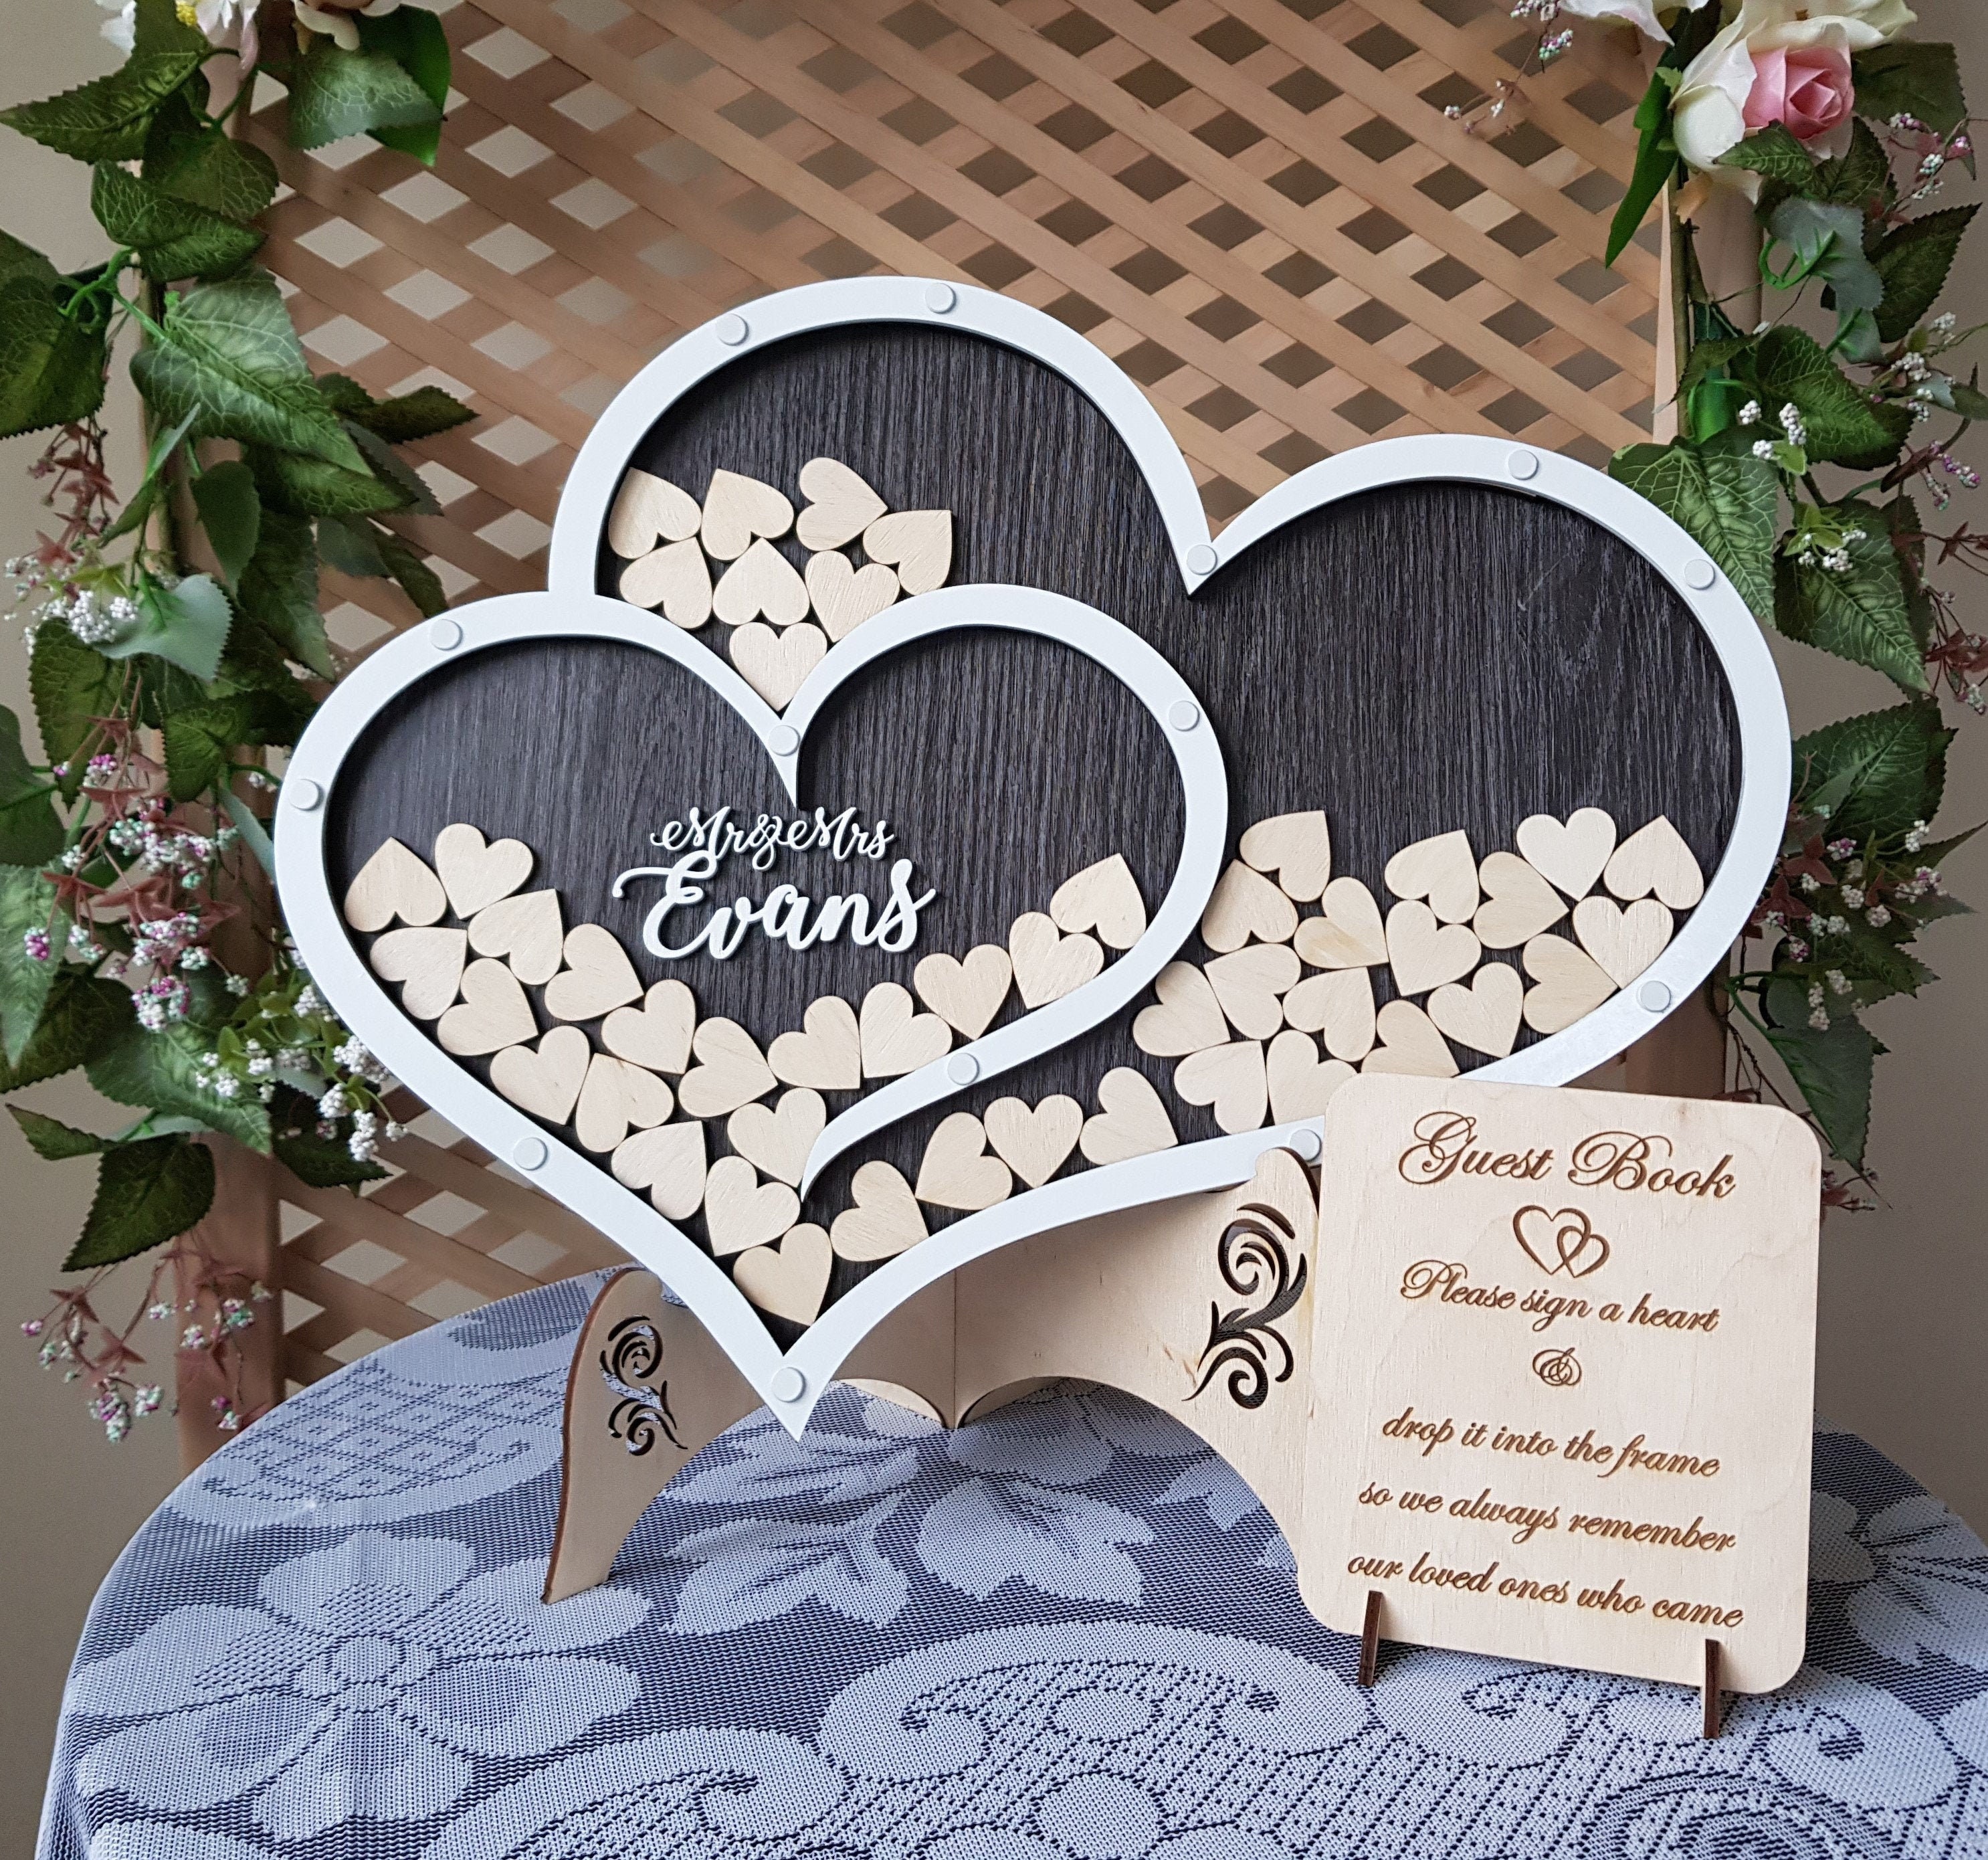 Wood Heart Cutouts, 160 Pcs 3.15 inch Unfinished Wooden Hearts for Guest Book for DIY Crafts, Wedding Decor, and Valentine's Day Ornaments, by